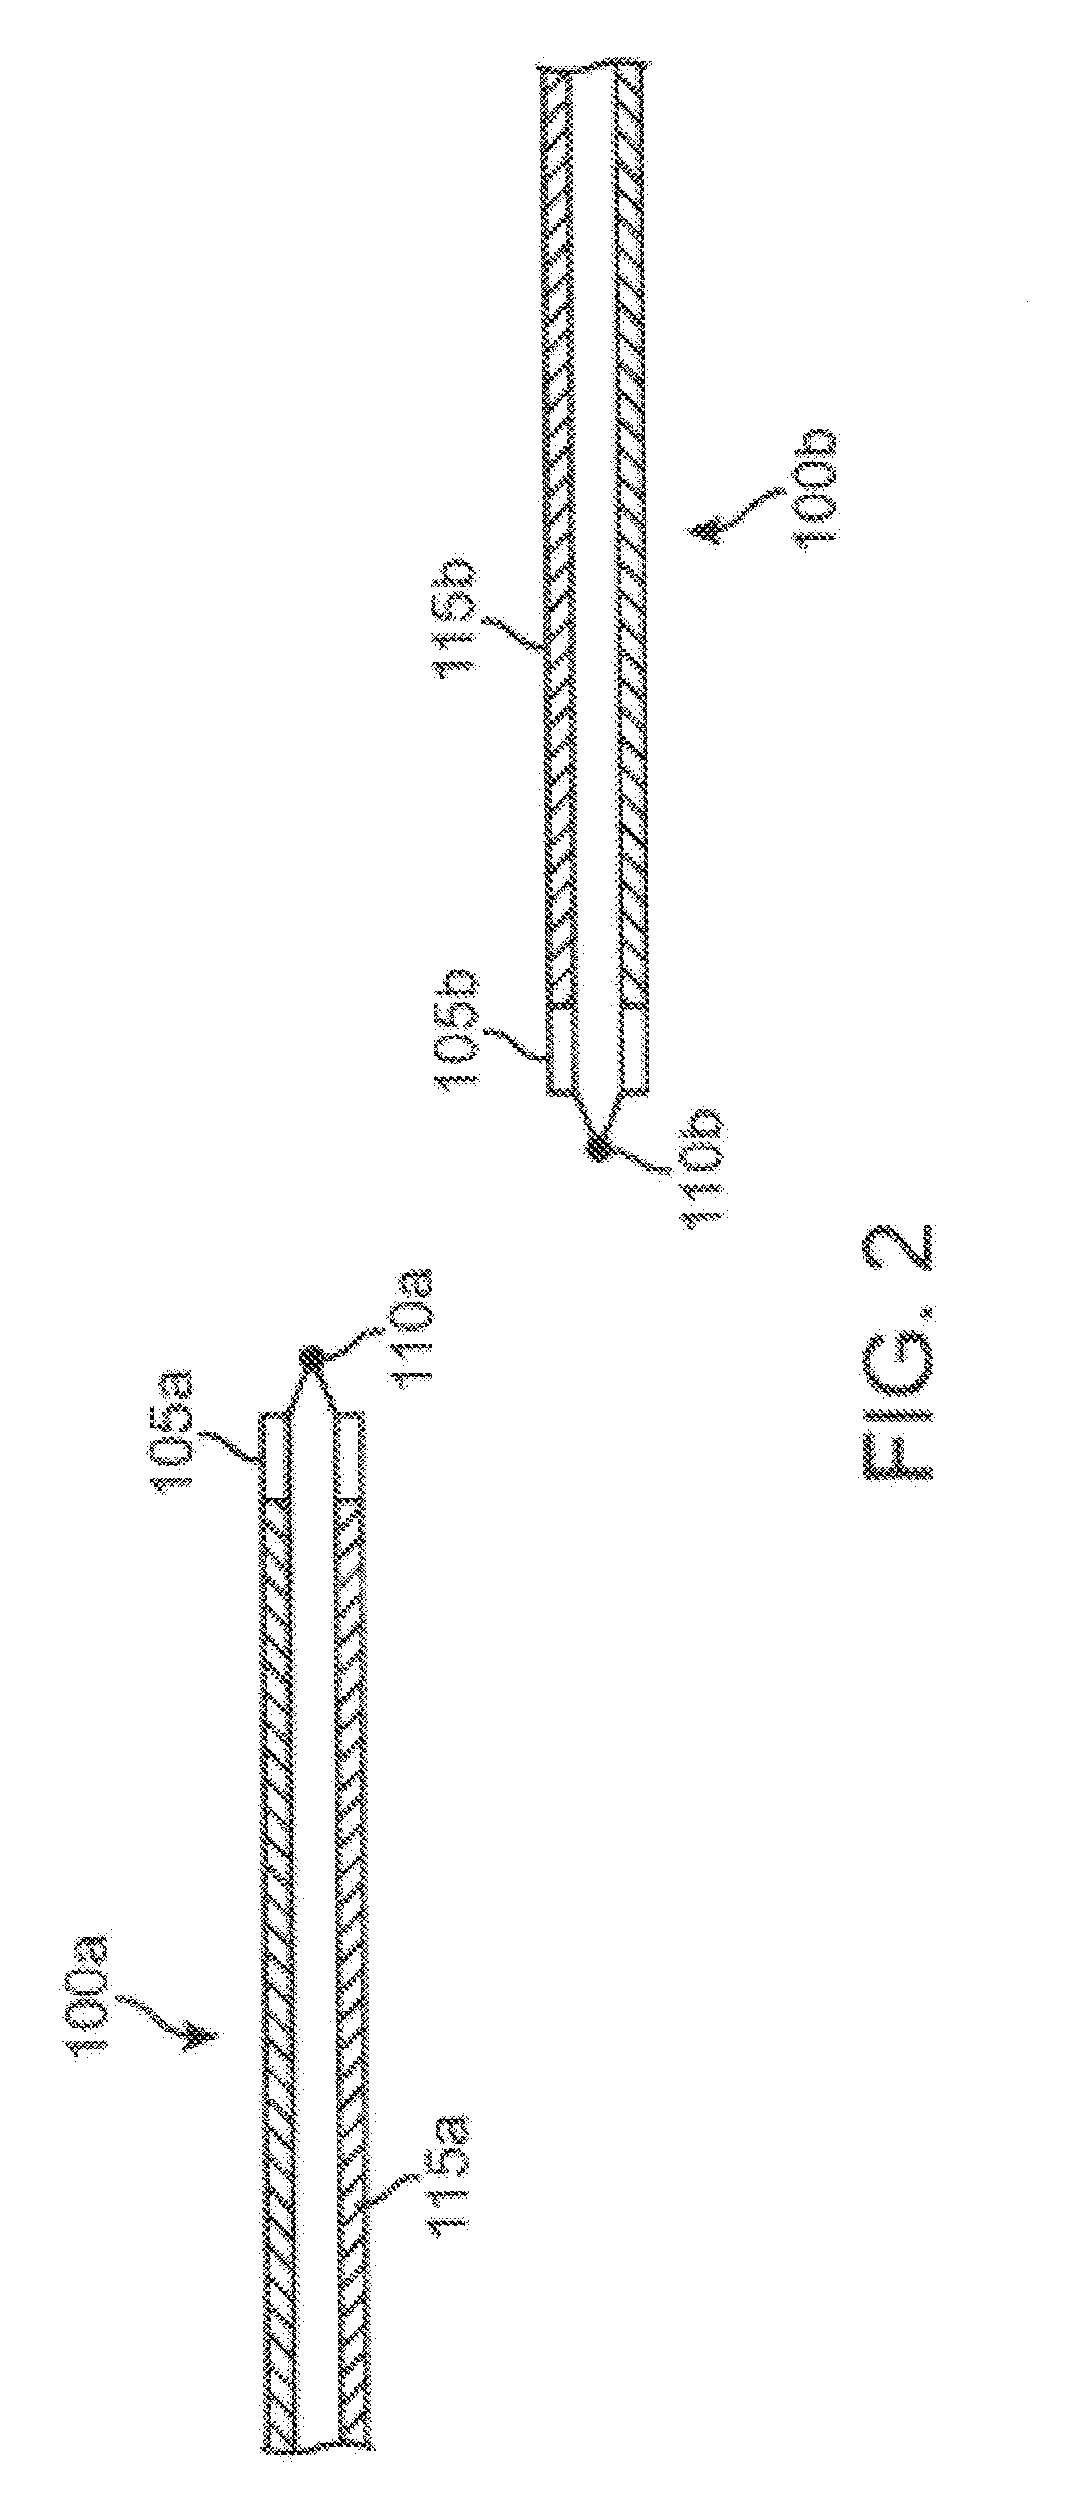 Recanalizing occluded vessels using radiofrequency energy